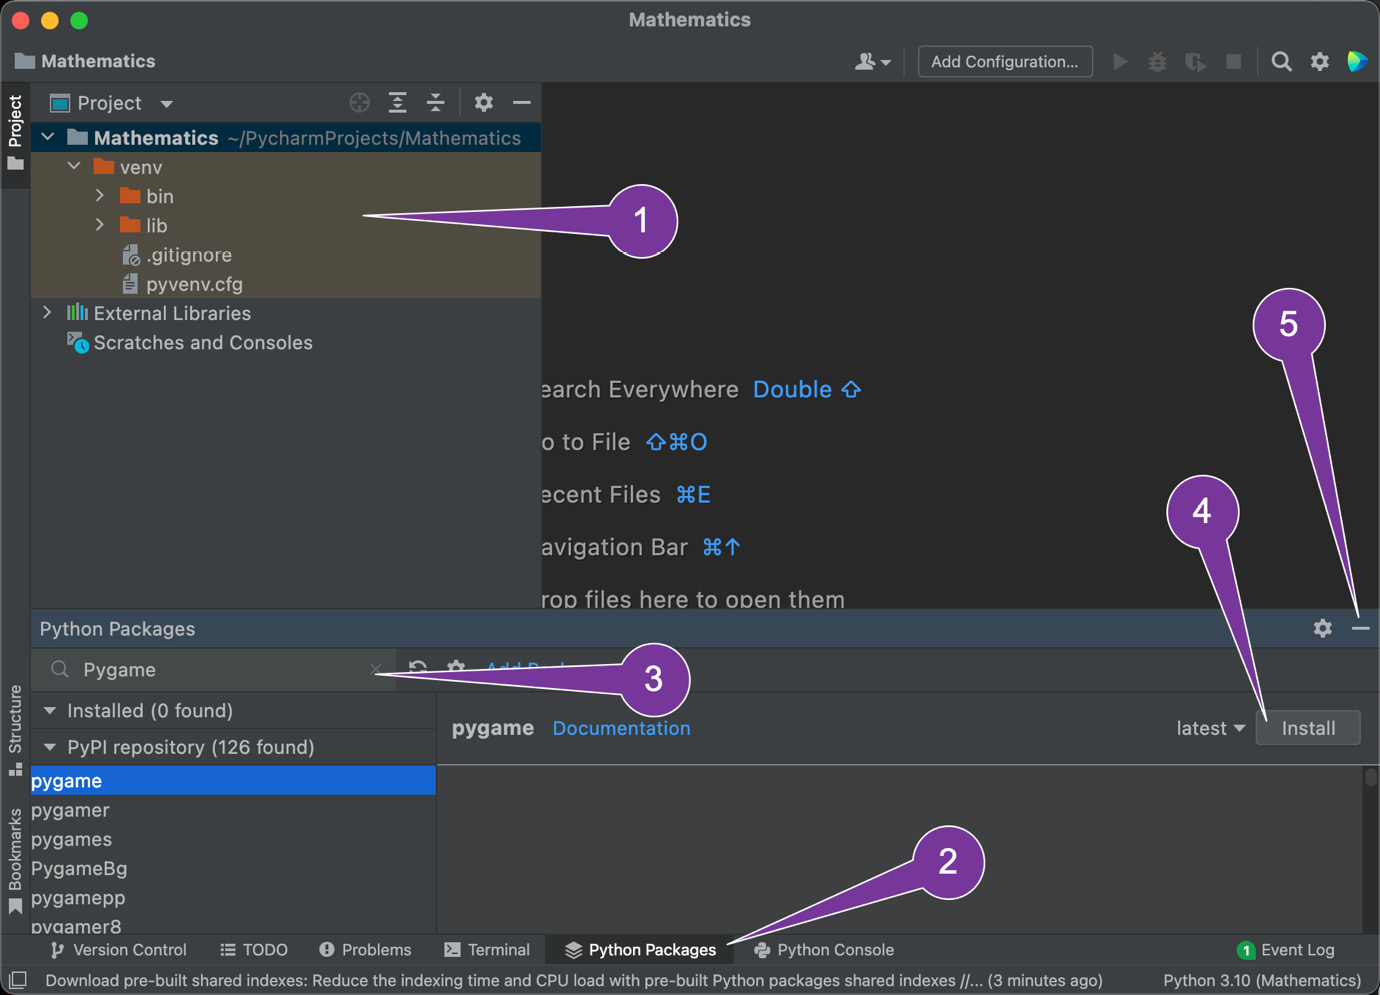 Figure 1.4: The PyCharm interface and package installation window
